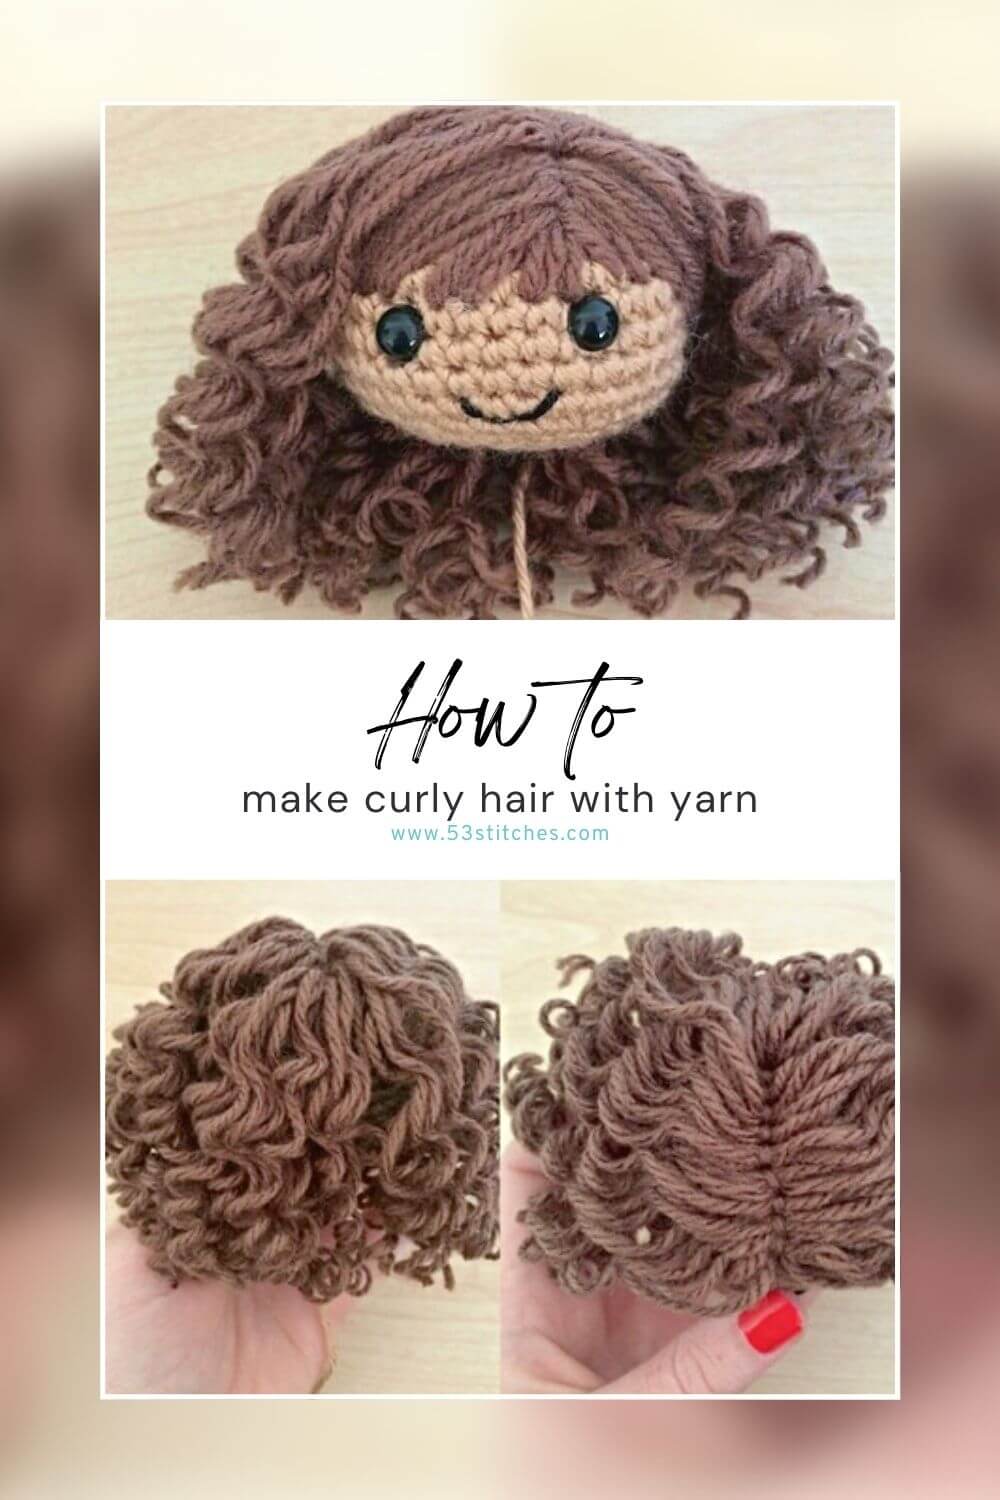 How to make curly doll hair with yarn